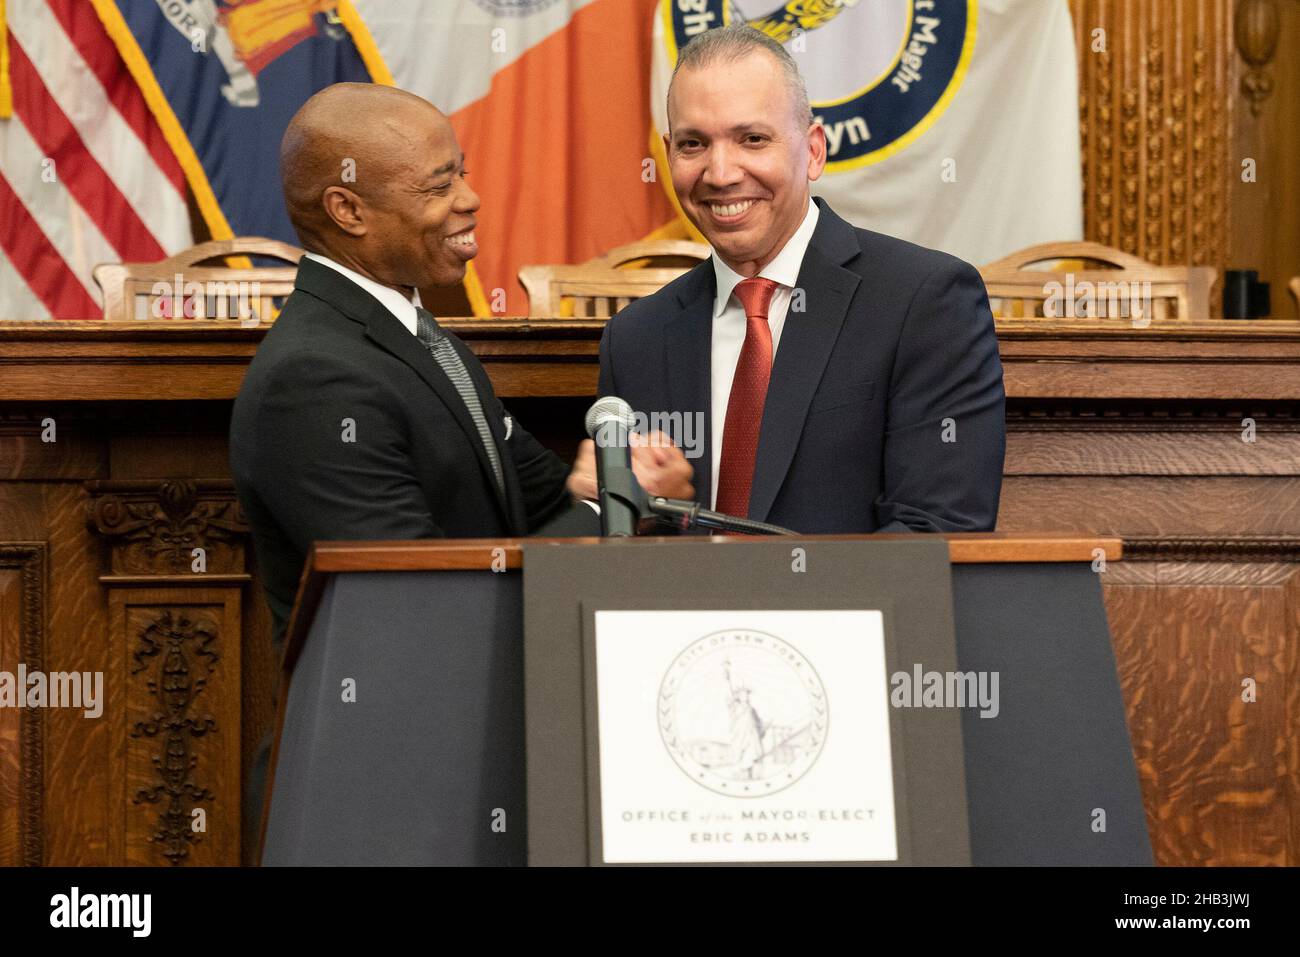 New York, USA. 16th Dec, 2021. Mayor-elect Eric Adams congratulates Louis Molina as his pick for Department of Correction Commissioner at Brooklyn Borough Hall. Eric Adams has chosen Louis Molina who is chief of the Las Vegas Department of Public Safety. Louis Molina worked in the past at the NYPD and was first deputy commissioner or the Westchester County Department of Correction. In addition to introducing his pick for Department of Correction Adams answered questions about his ideas for fighting COVID-19 pandemic among others. (Photo by Lev Radin/Pacific Press) Credit: Pacific Press Media P Stock Photo